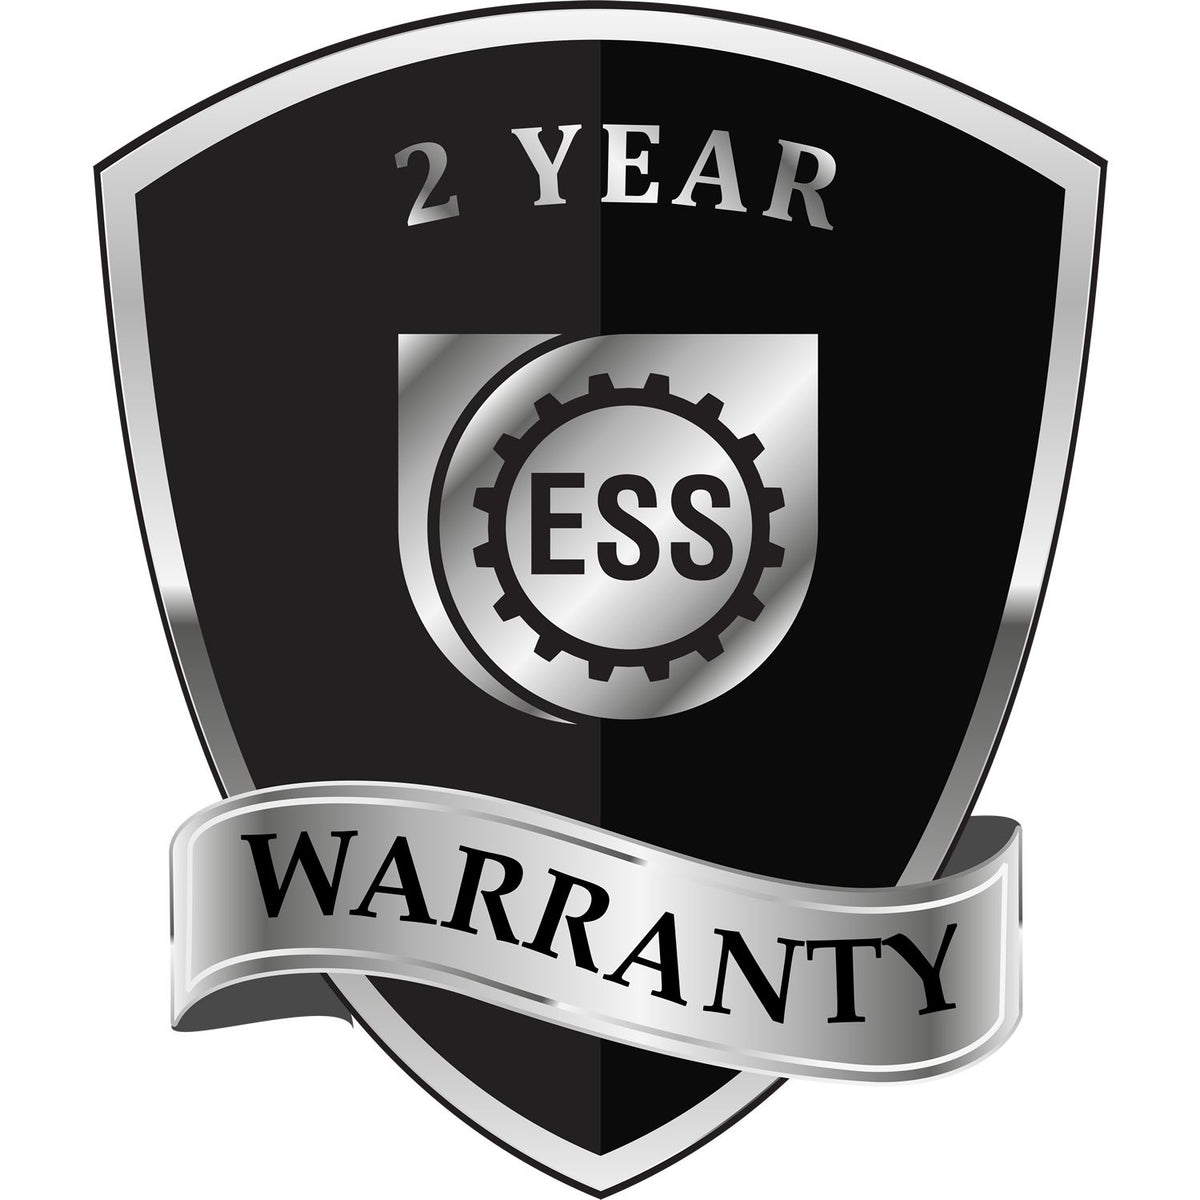 A black and silver badge or emblem showing warranty information for the Heavy Duty Cast Iron Connecticut Geologist Seal Embosser